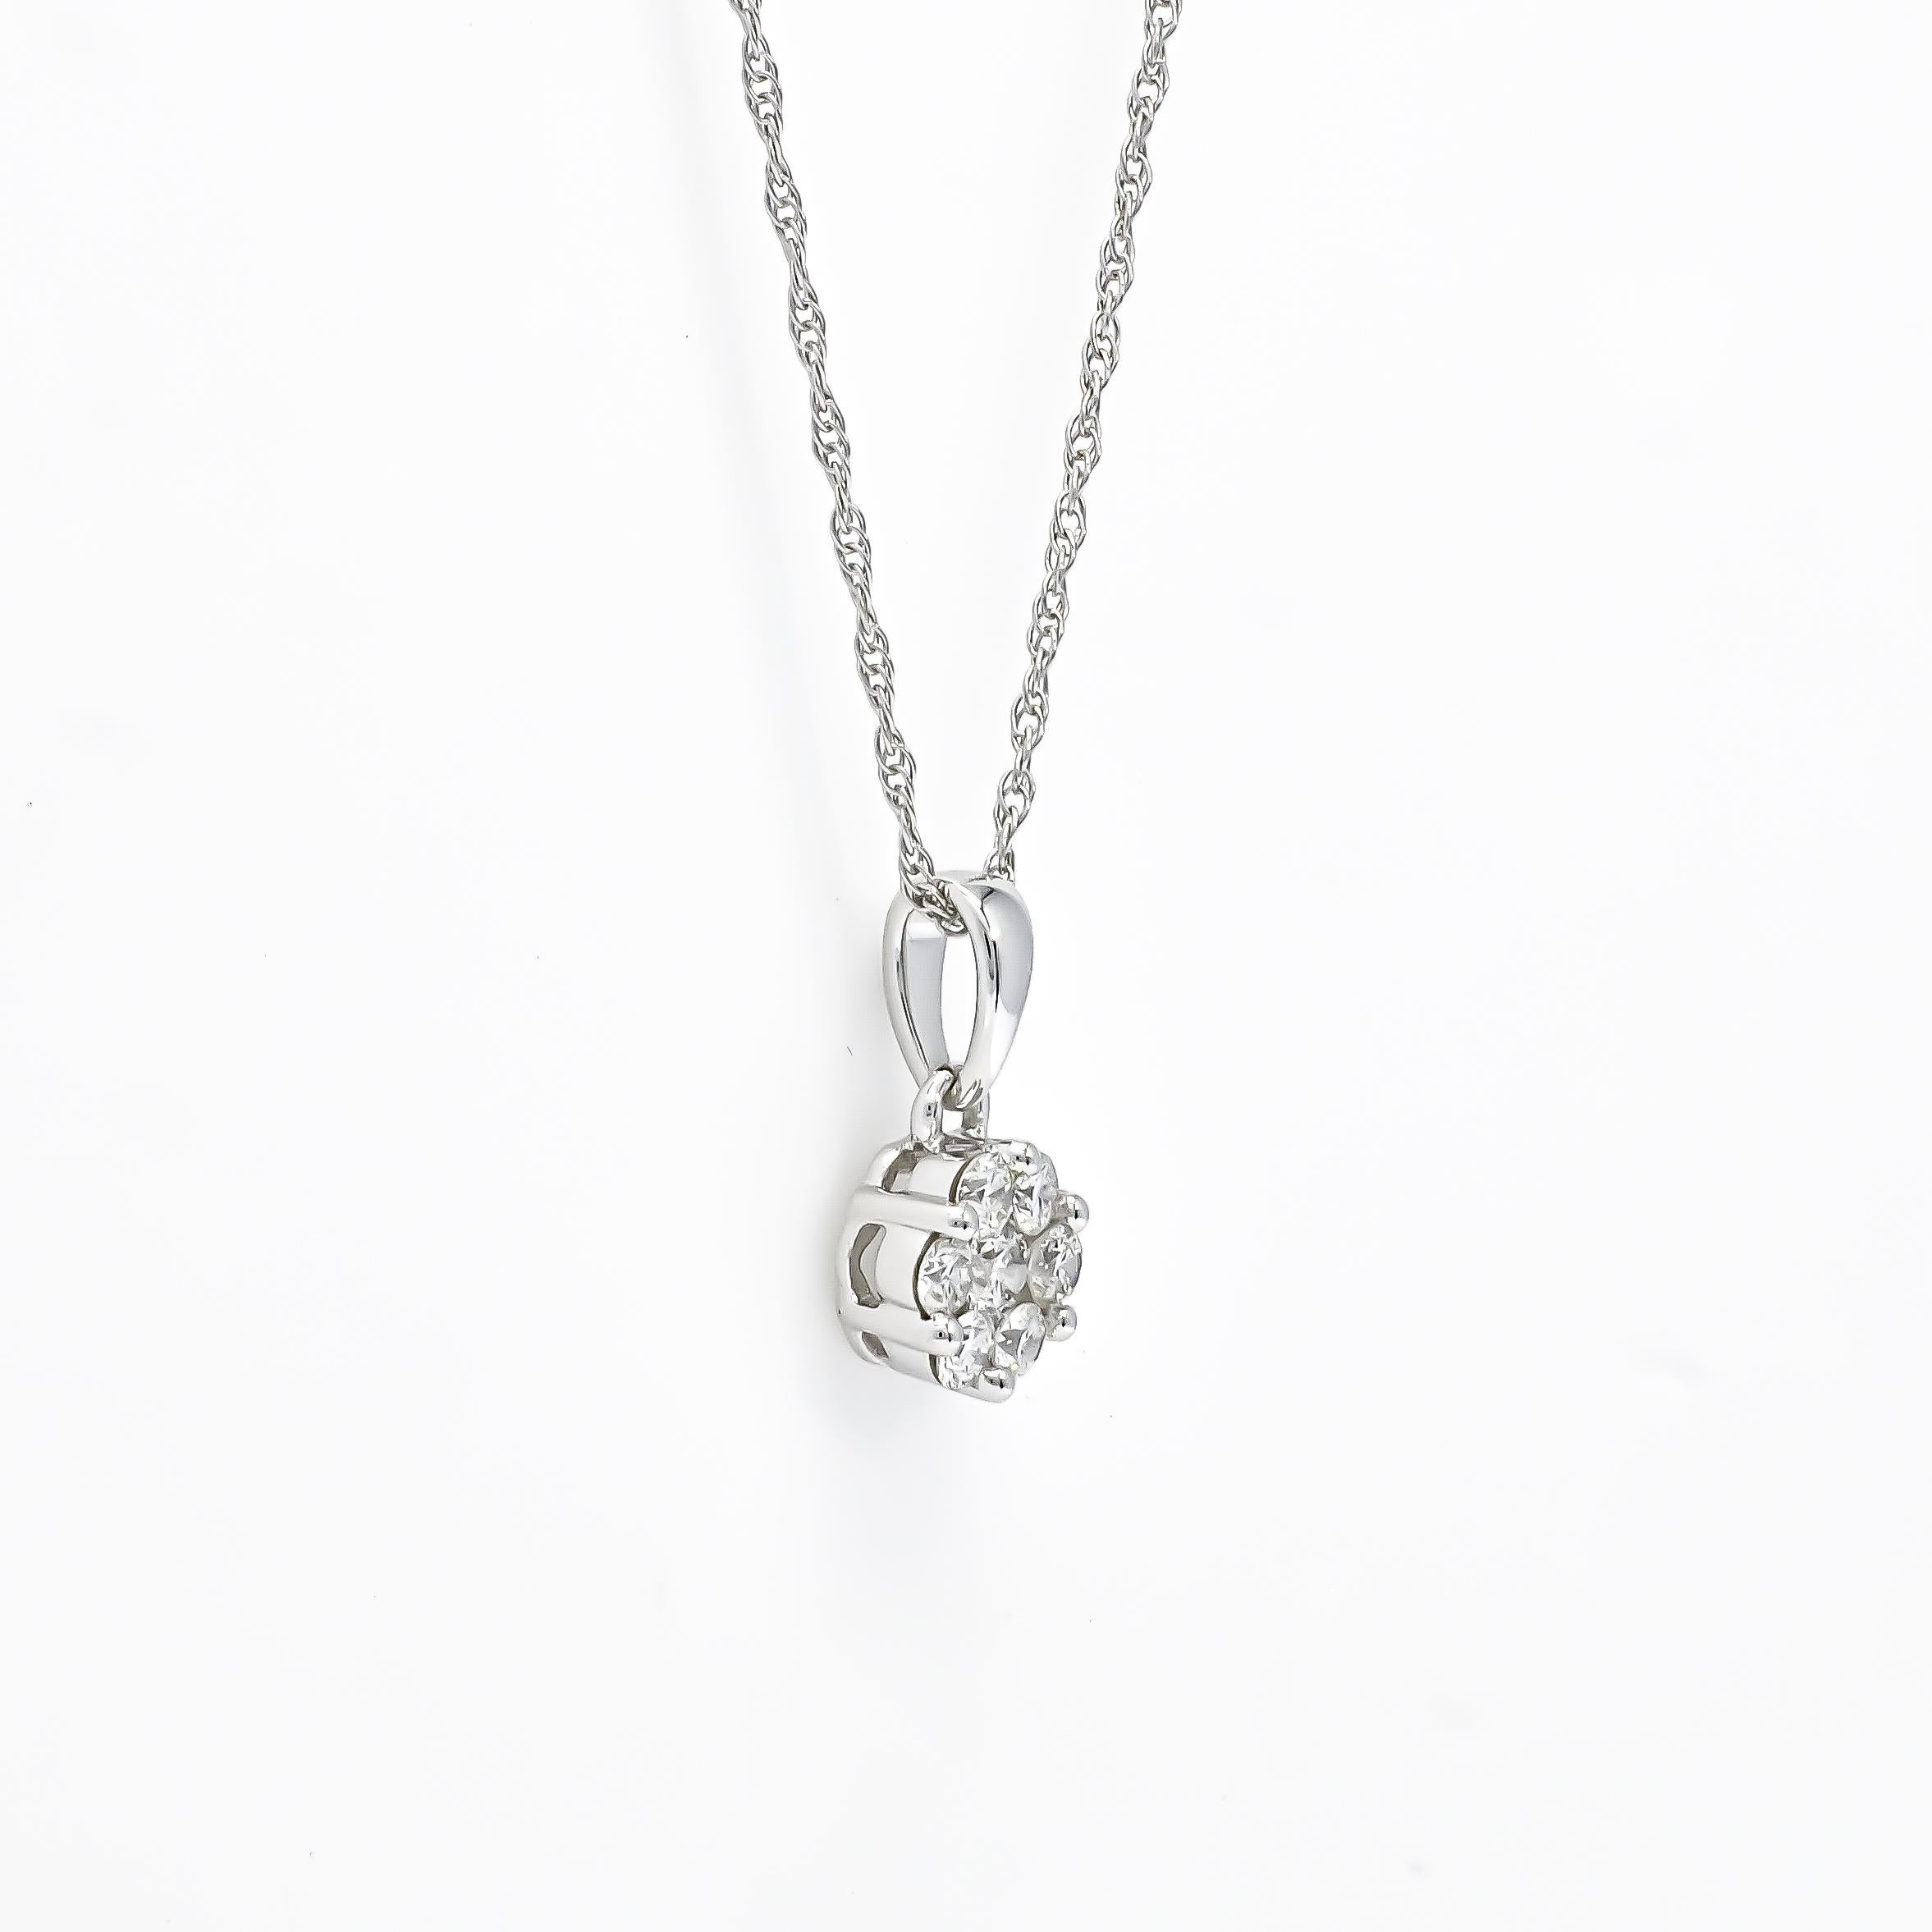 The design of this pendant necklace seamlessly blends classic charm with contemporary aesthetics, making it a versatile piece that can effortlessly elevate both casual and formal ensembles. Whether worn as a statement piece for a special occasion or